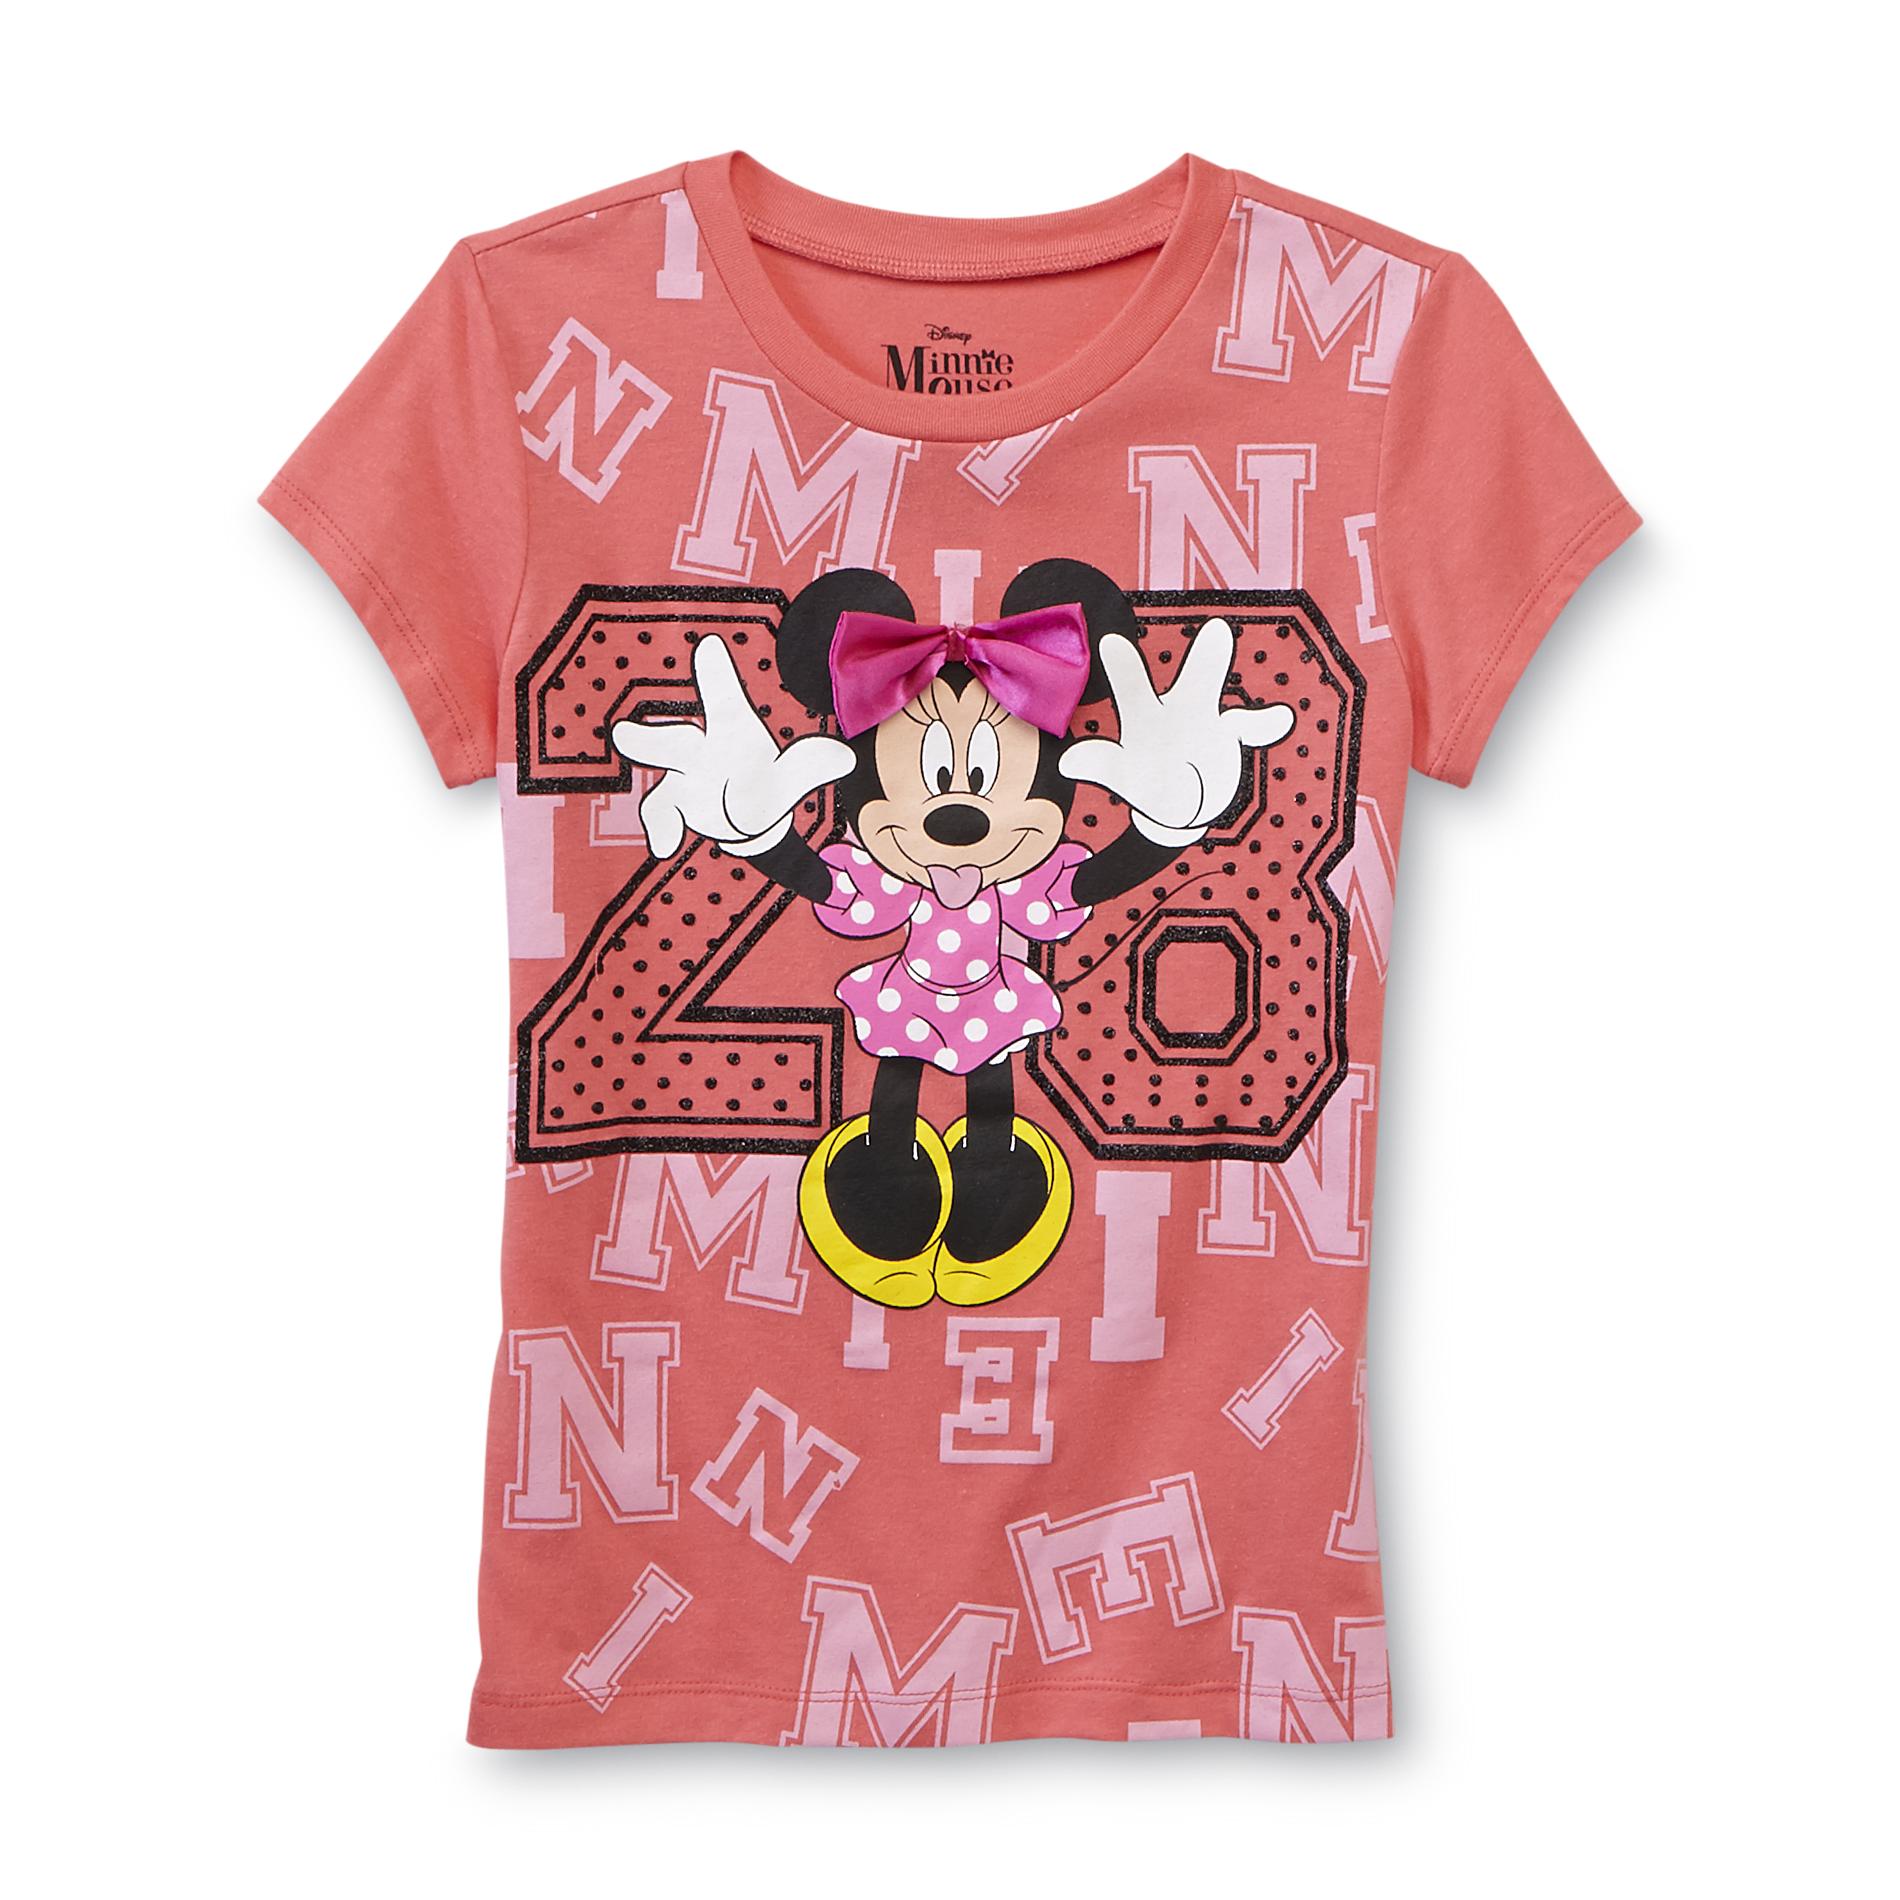 Disney Minnie Mouse Girl's Graphic T-shirt - 28